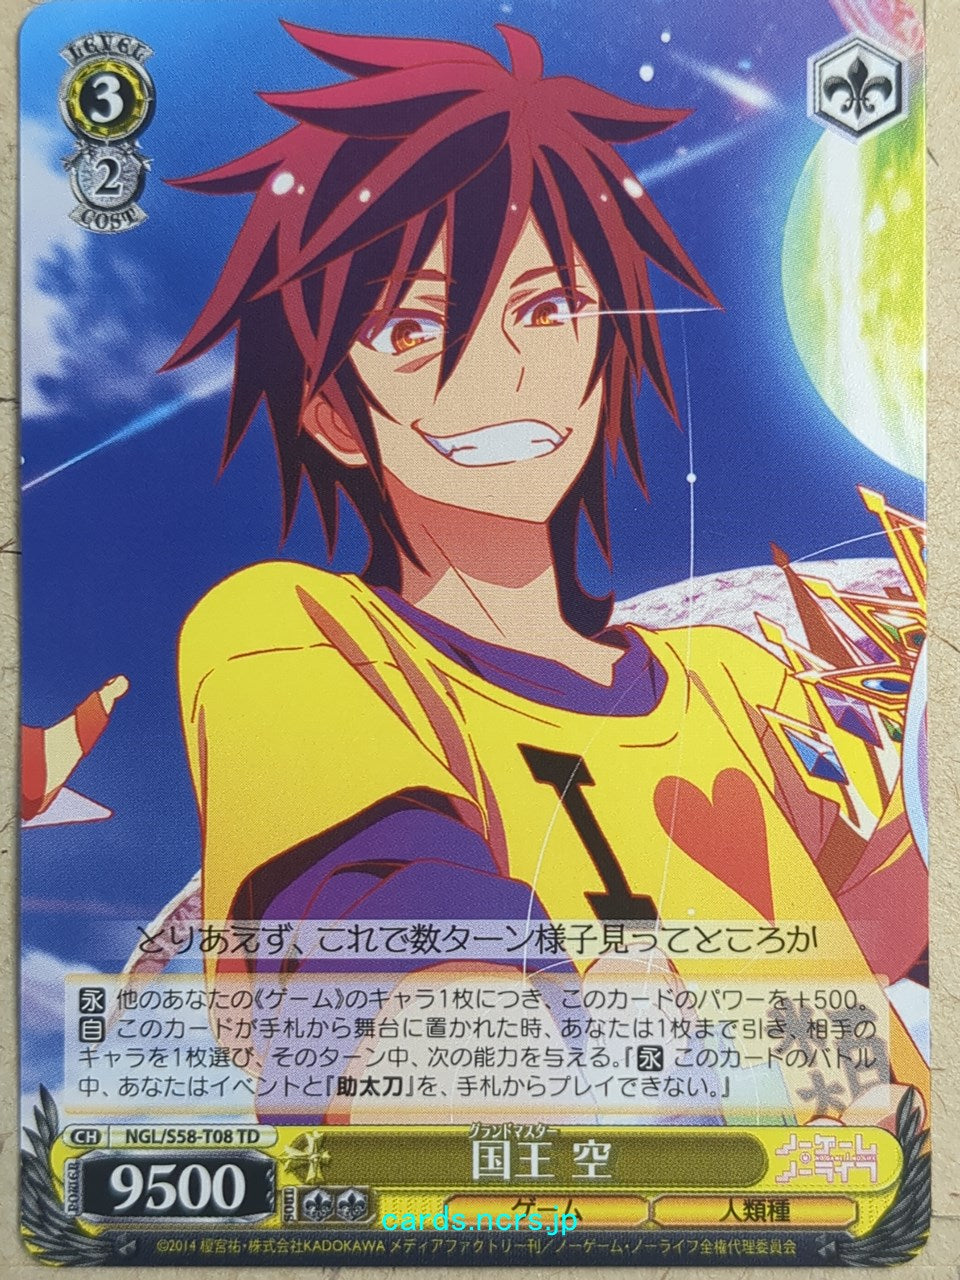 Weiss Schwarz No Game, No Life -Sora-   Trading Card NGL/S58-T08TD